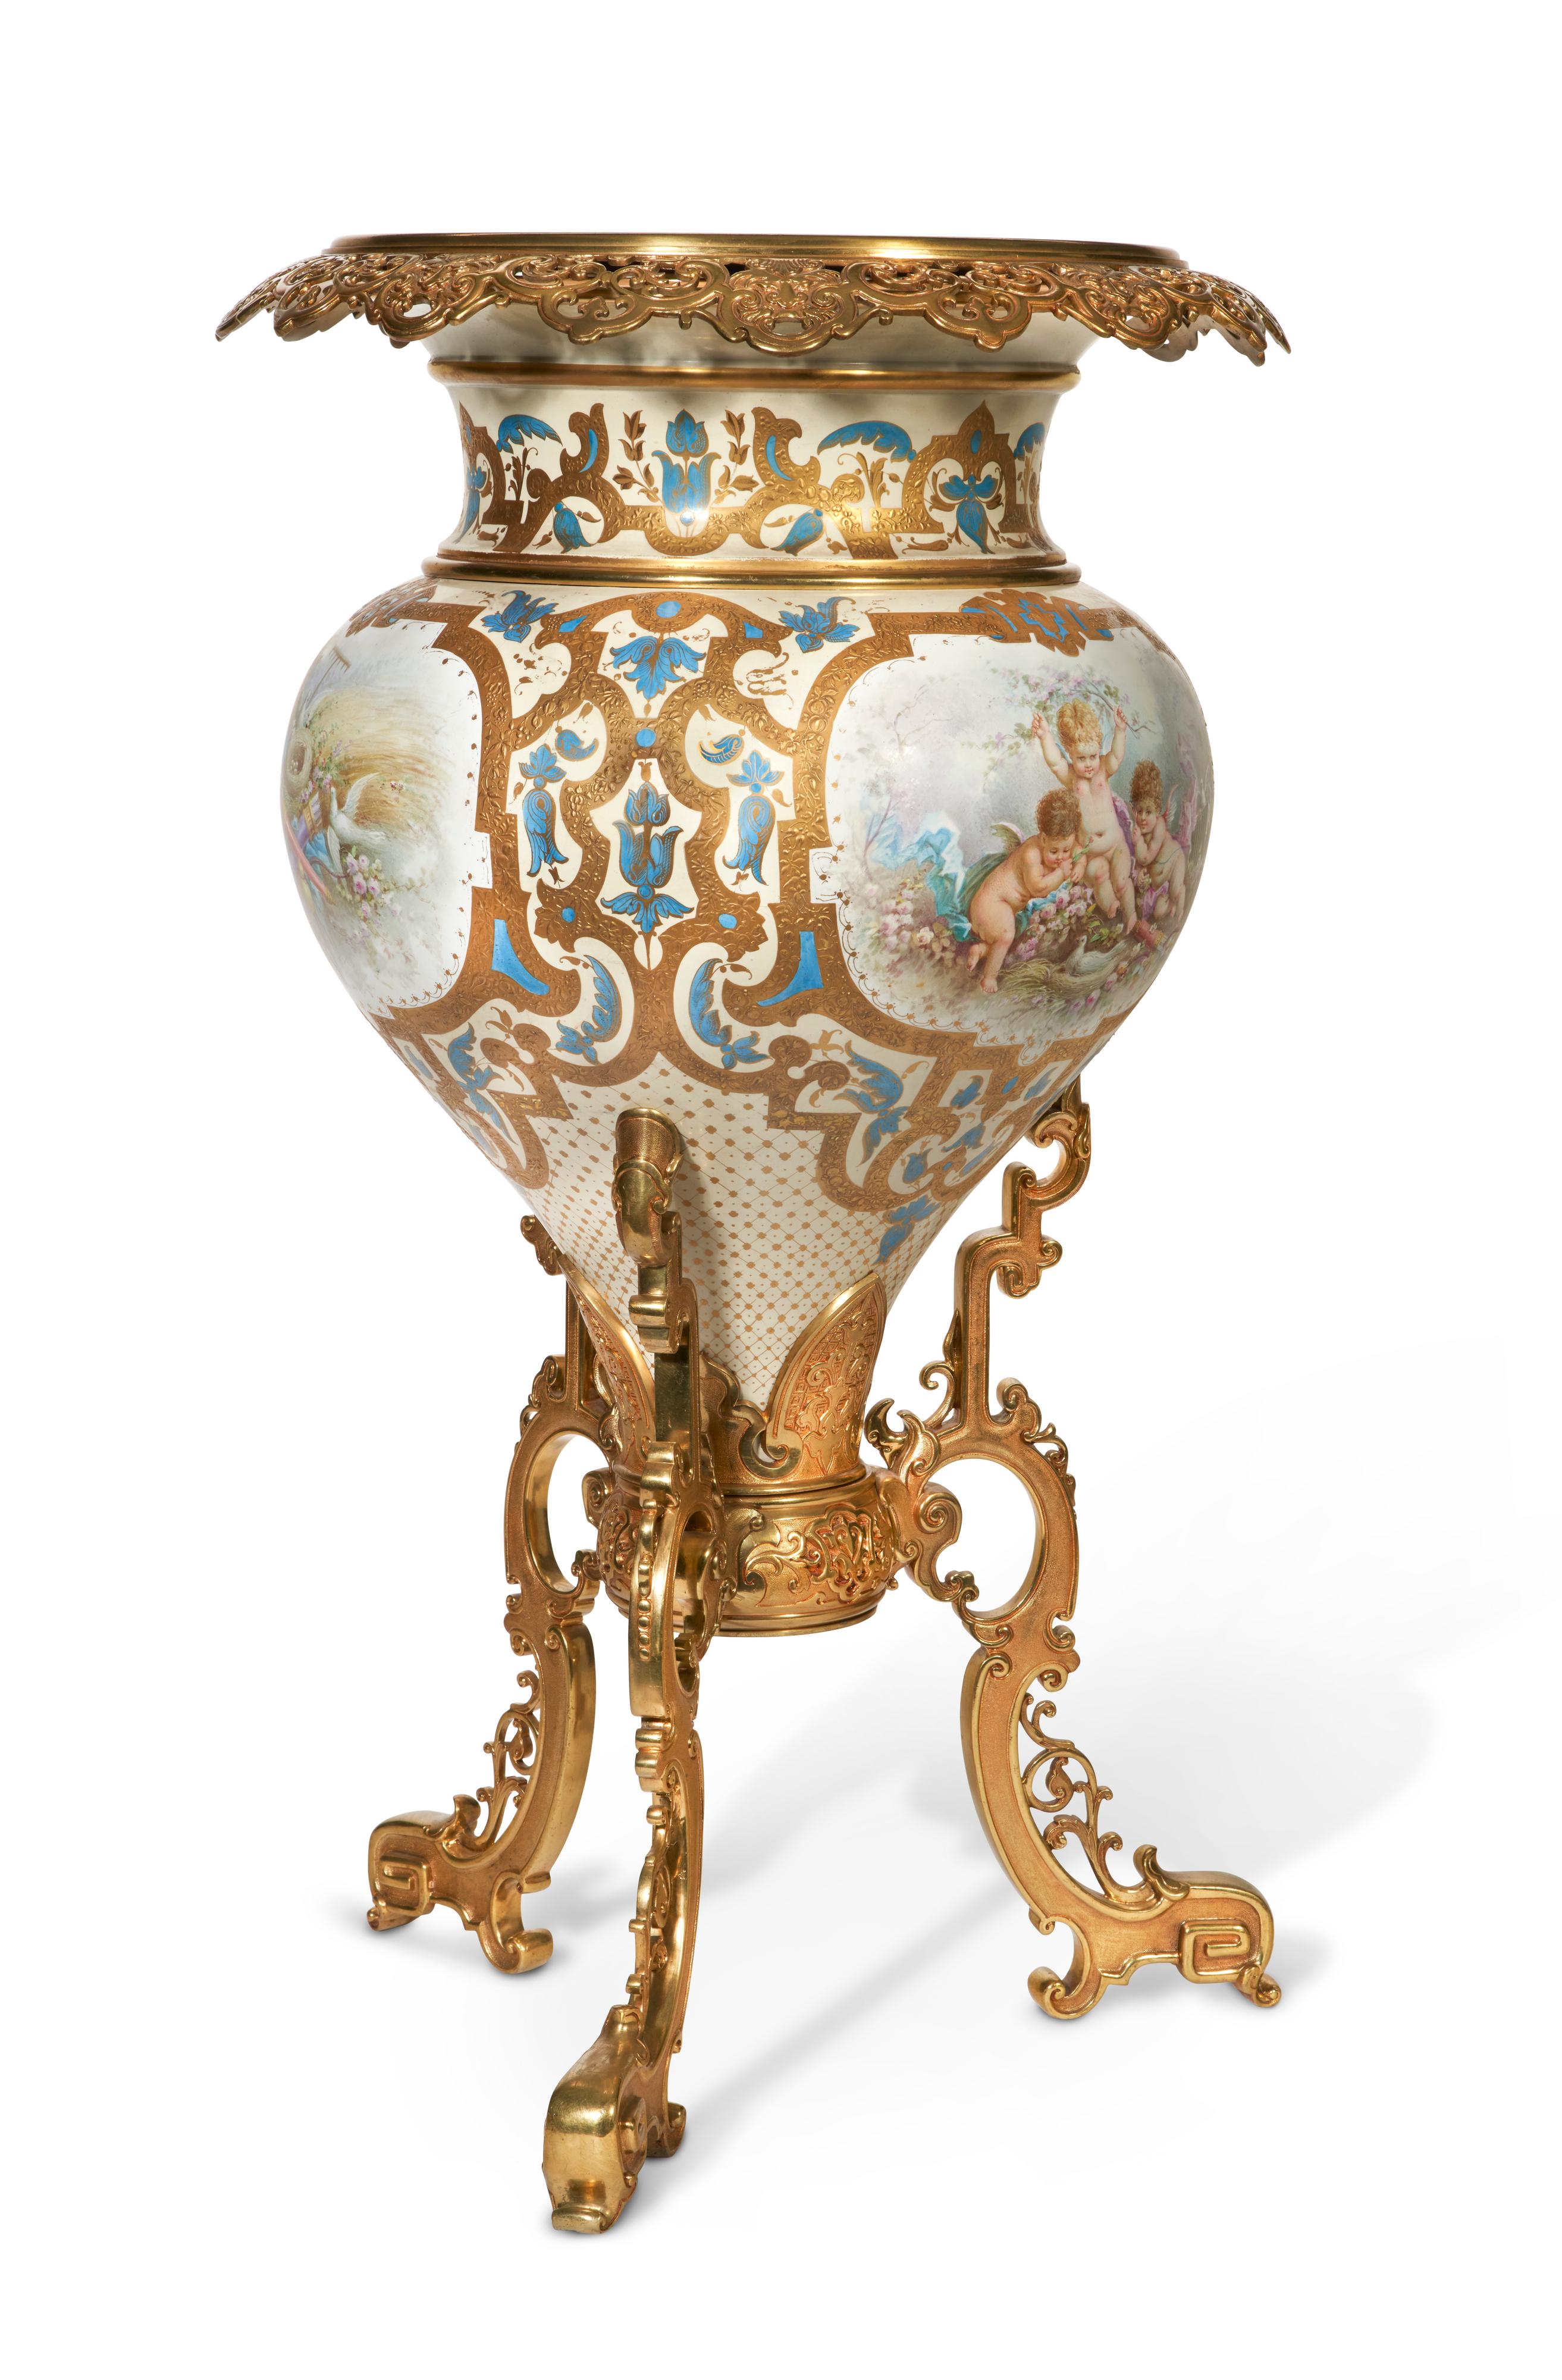 Louis XVI Large & Important French 19th C. Sevres Porcelain Ormolu Mounted Jardiniere For Sale